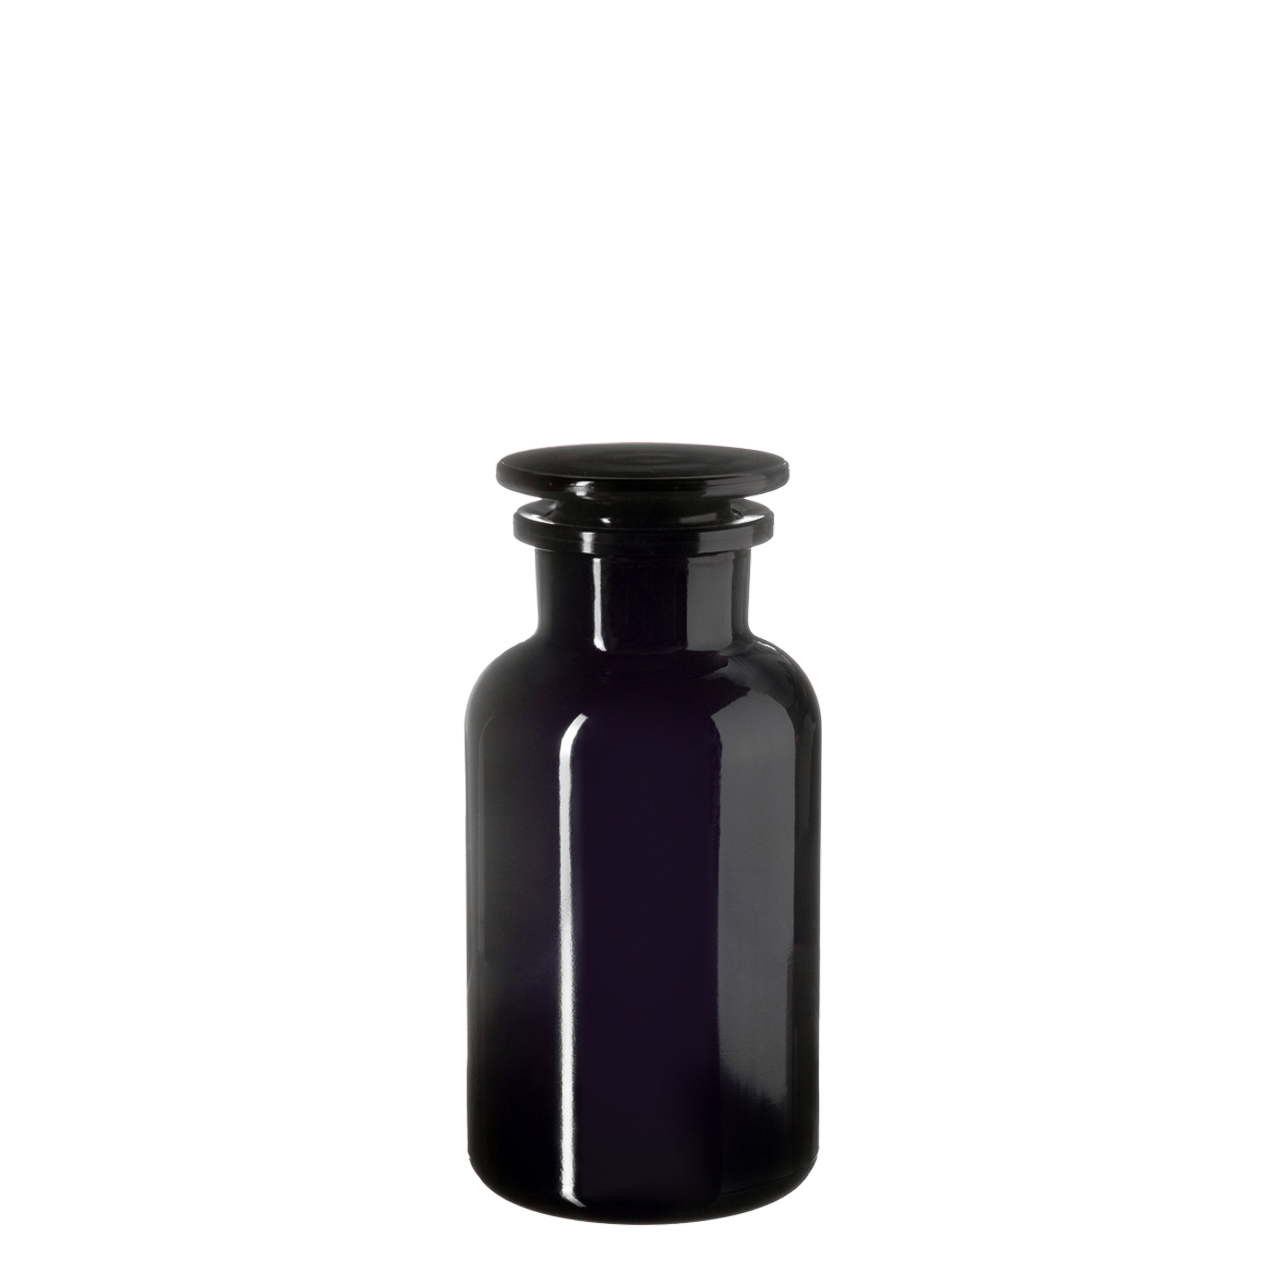 Apothecary jar Libra 500 ml, grinded glass stopper, Miron